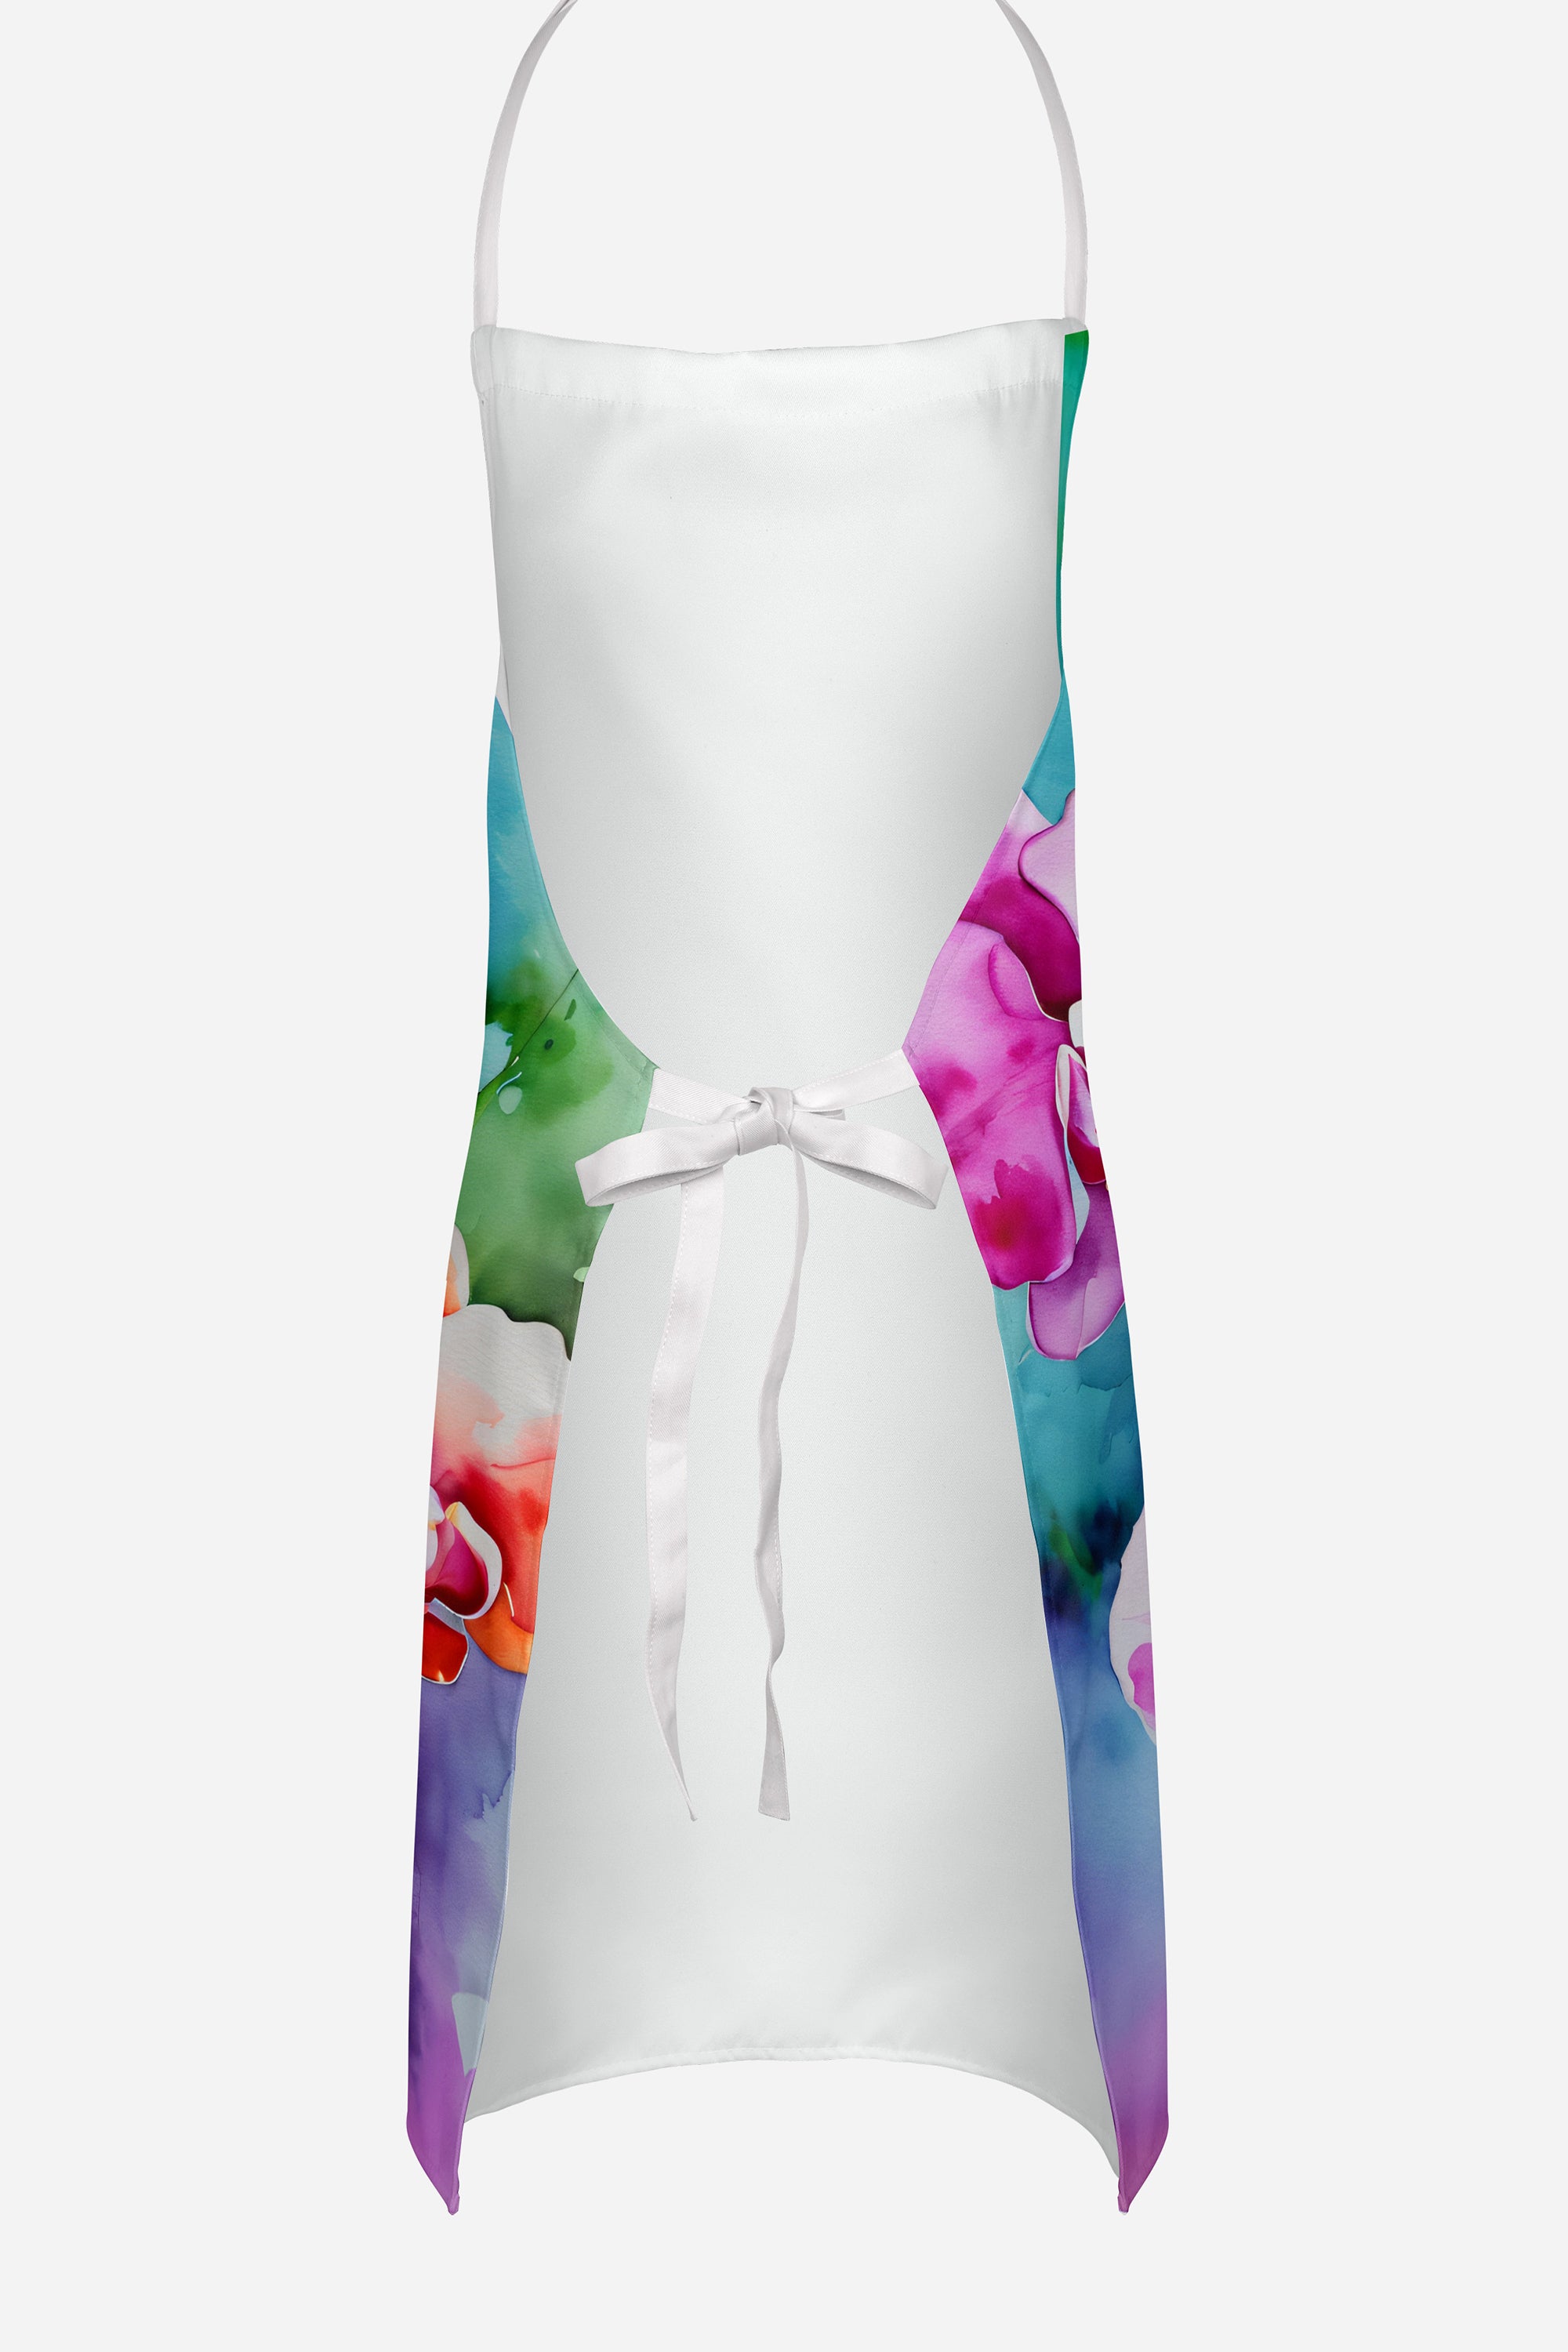 Orchids in Watercolor Apron